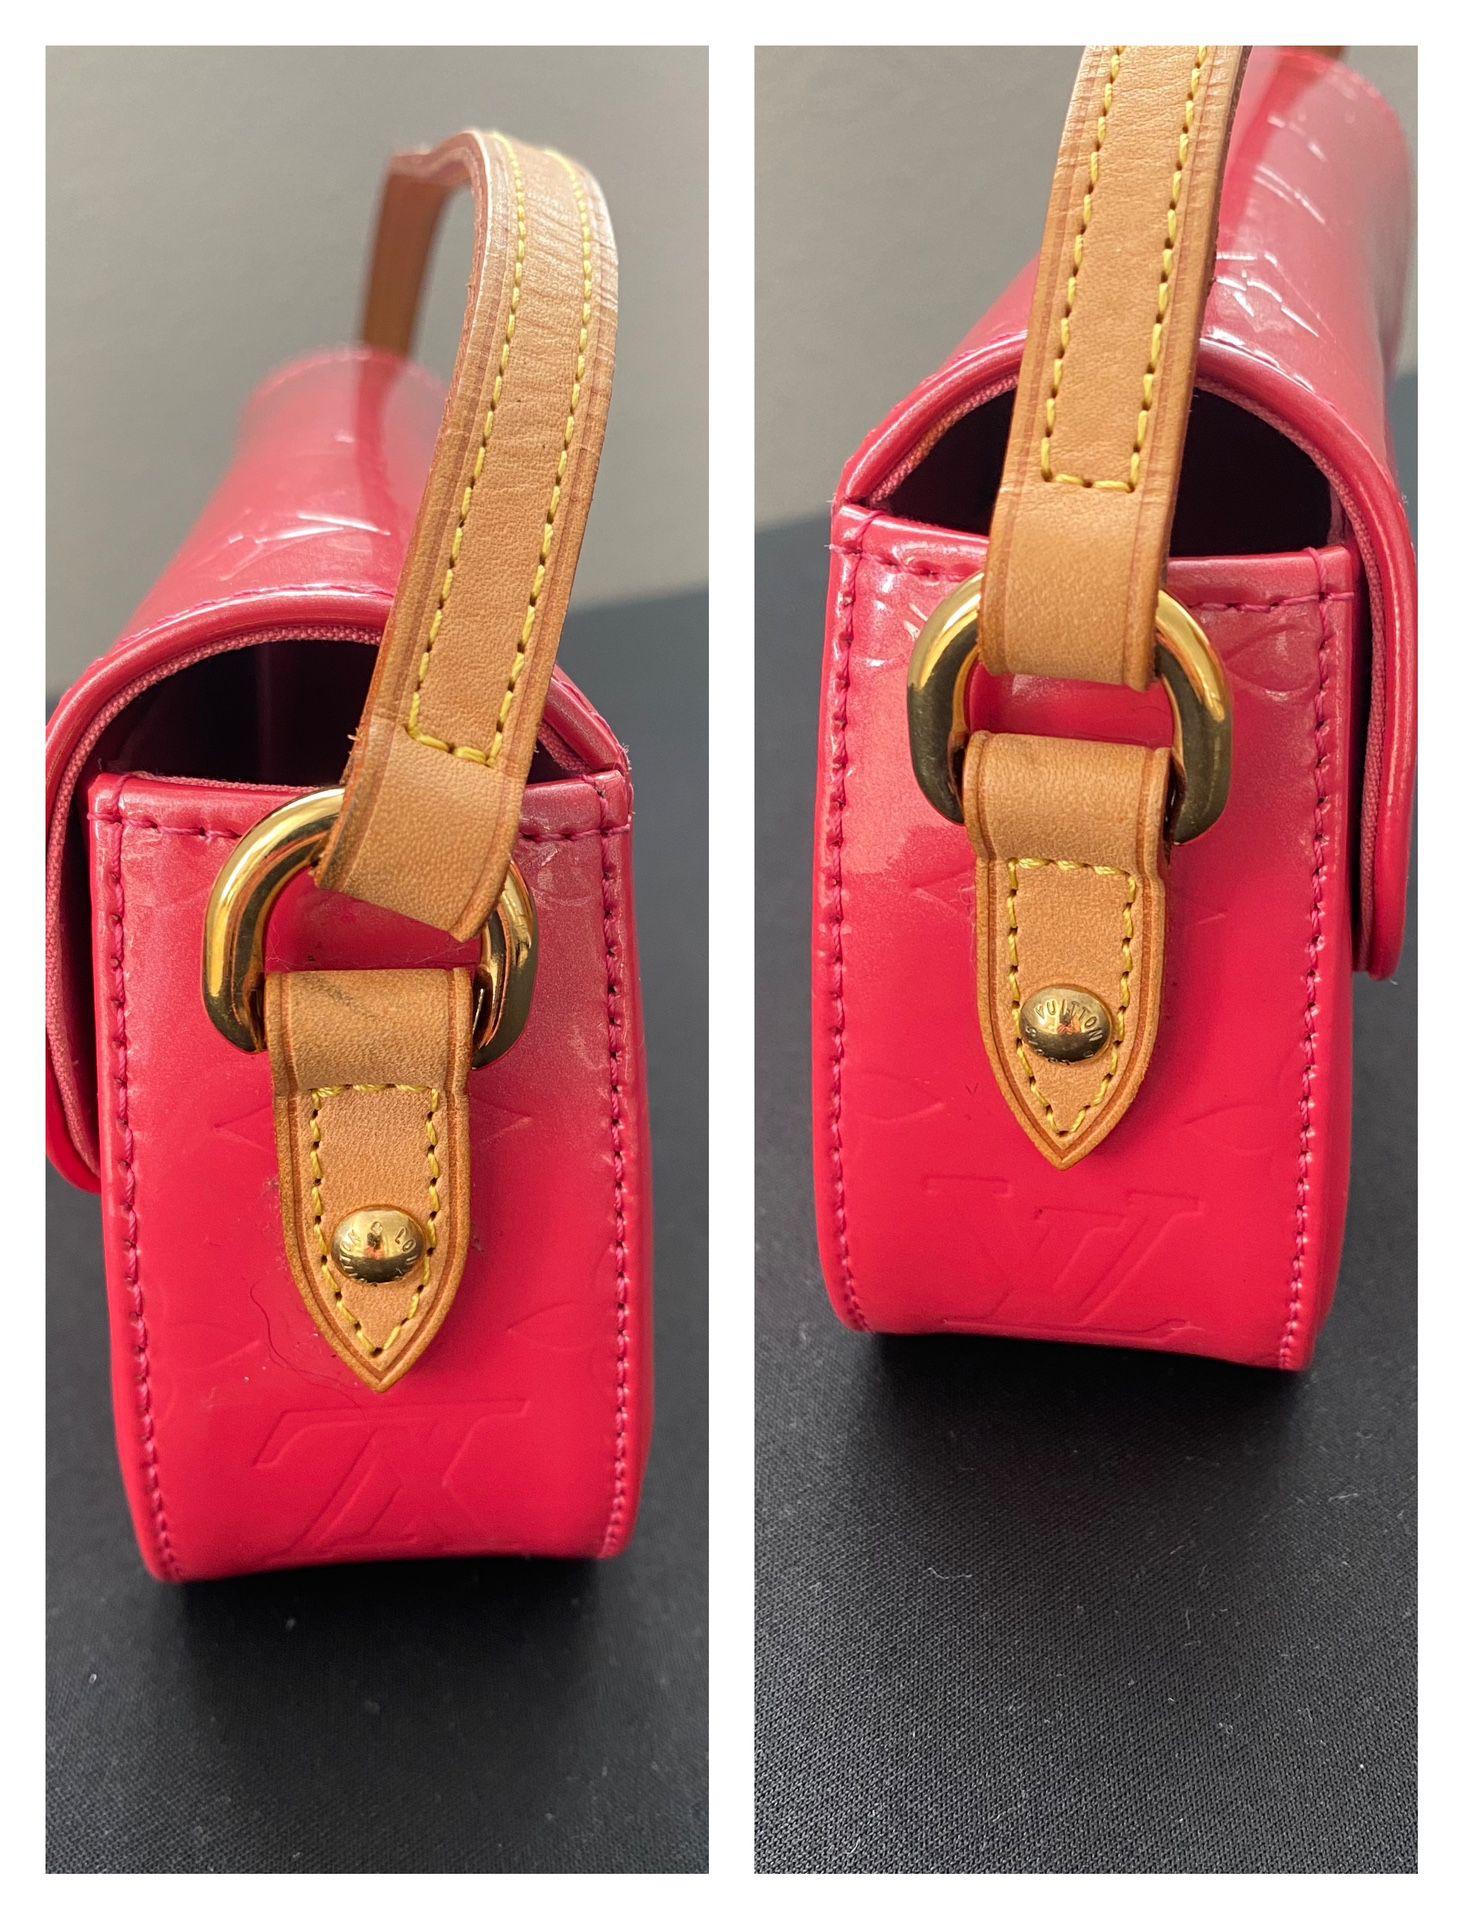 Louis Vuitton Vernis Two Way Bag for Sale in Honolulu, HI - OfferUp